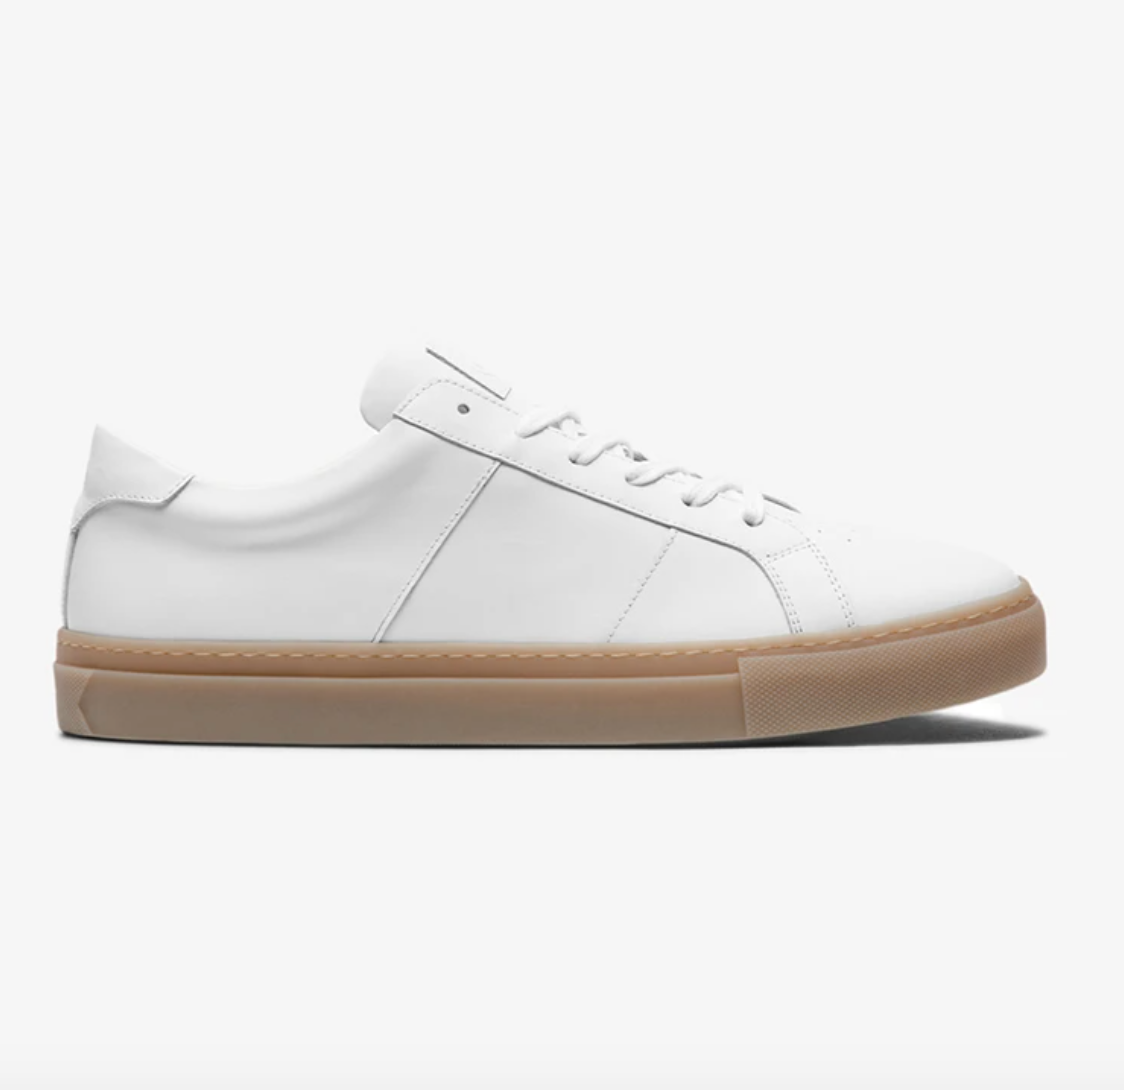 The Greats Royale White Sneakers